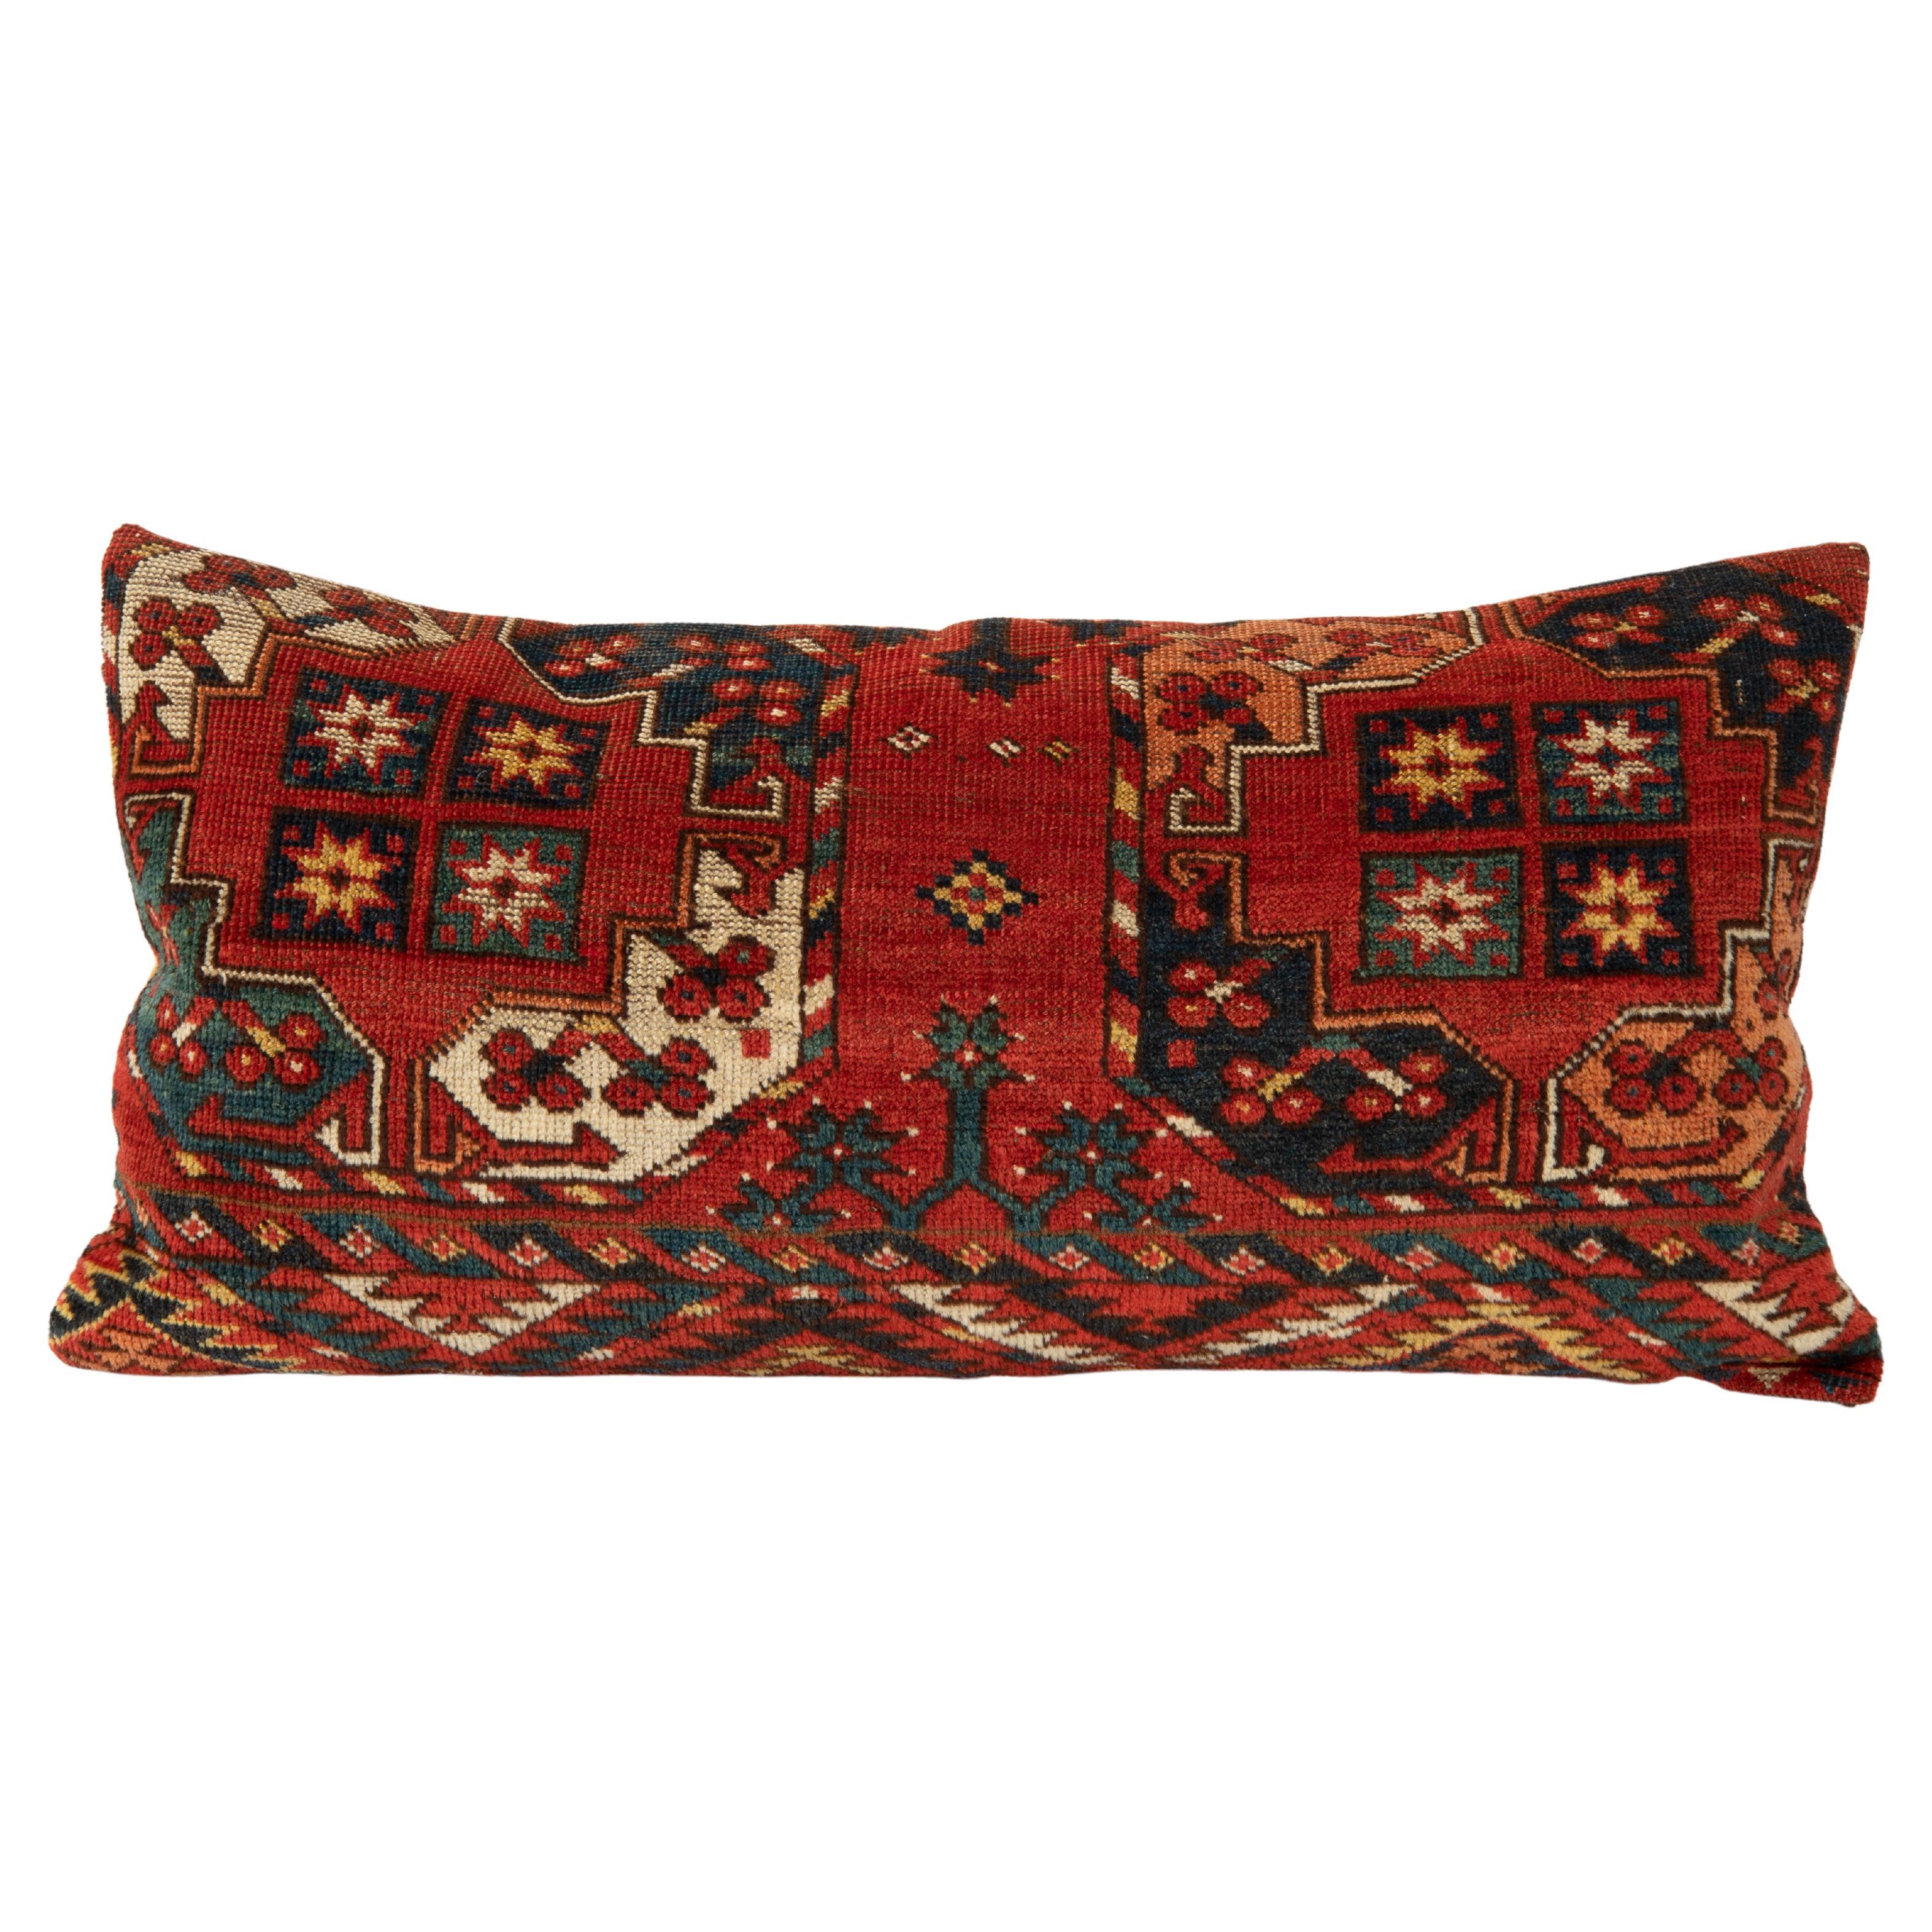 Antique Rug Pillowcase Made from Mid-19th C. Turkmen Ersari Rug Fragment For Sale